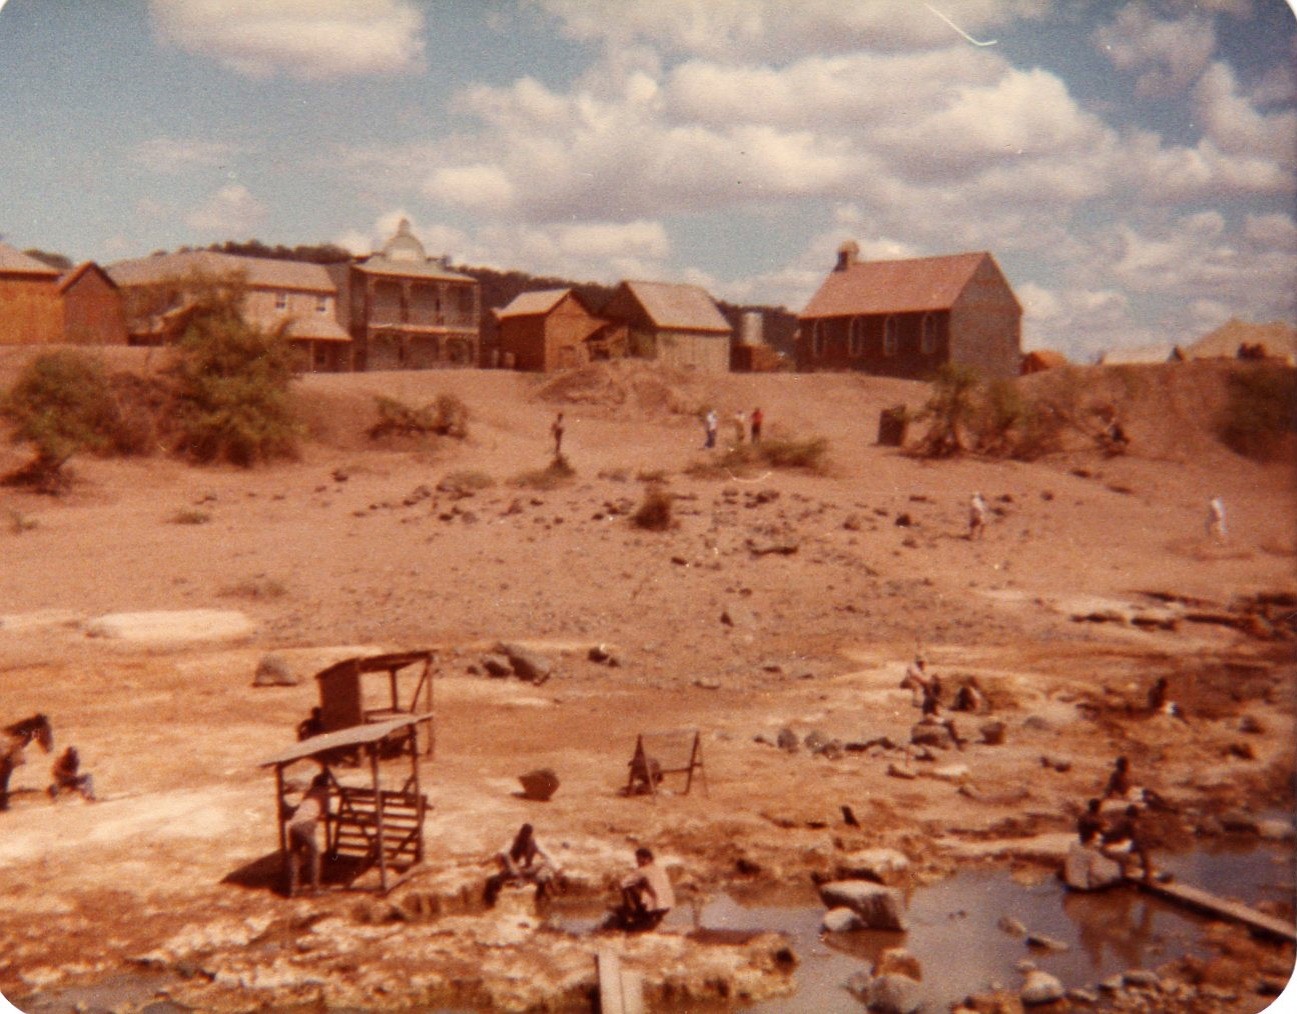 The shooting location in Kenya, including the fake buildings that made up the town. More text and photos after the jump.